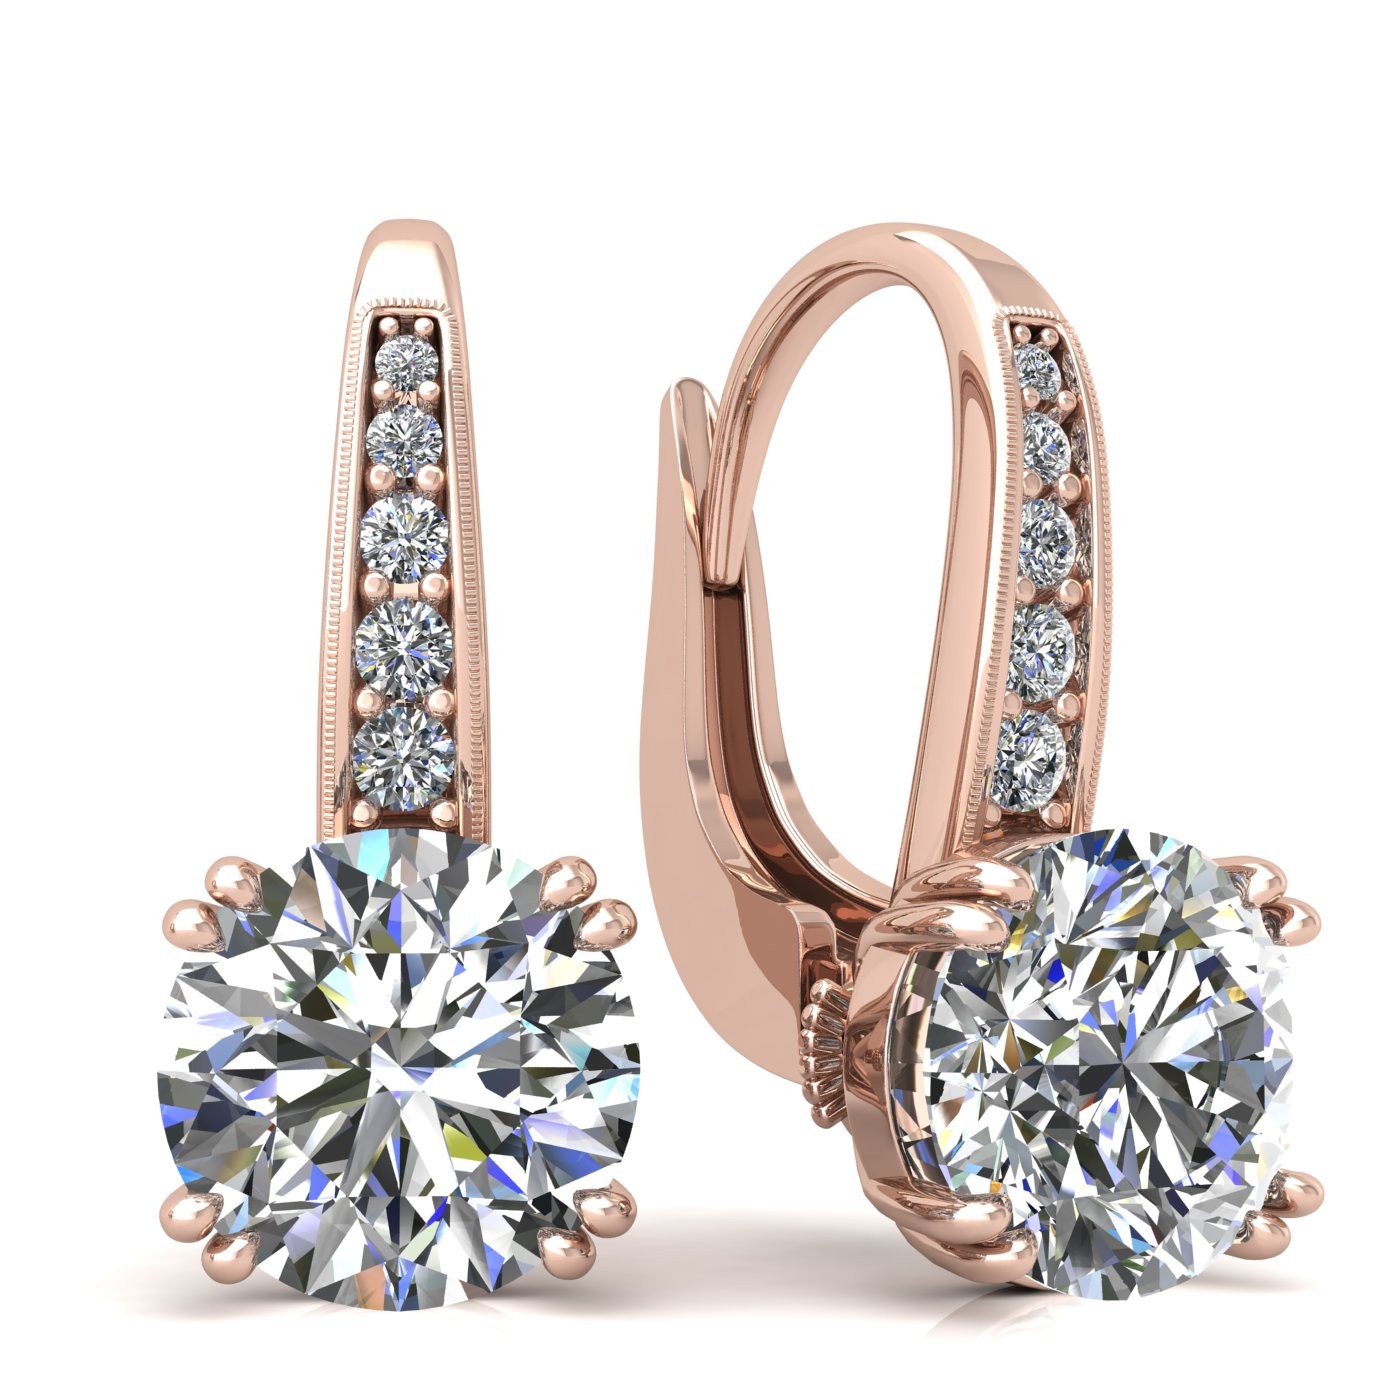 18k rose gold  0,3 ct each (0,6 ct tcw) 8 prongs round shape leverback diamond earrings Photos & images